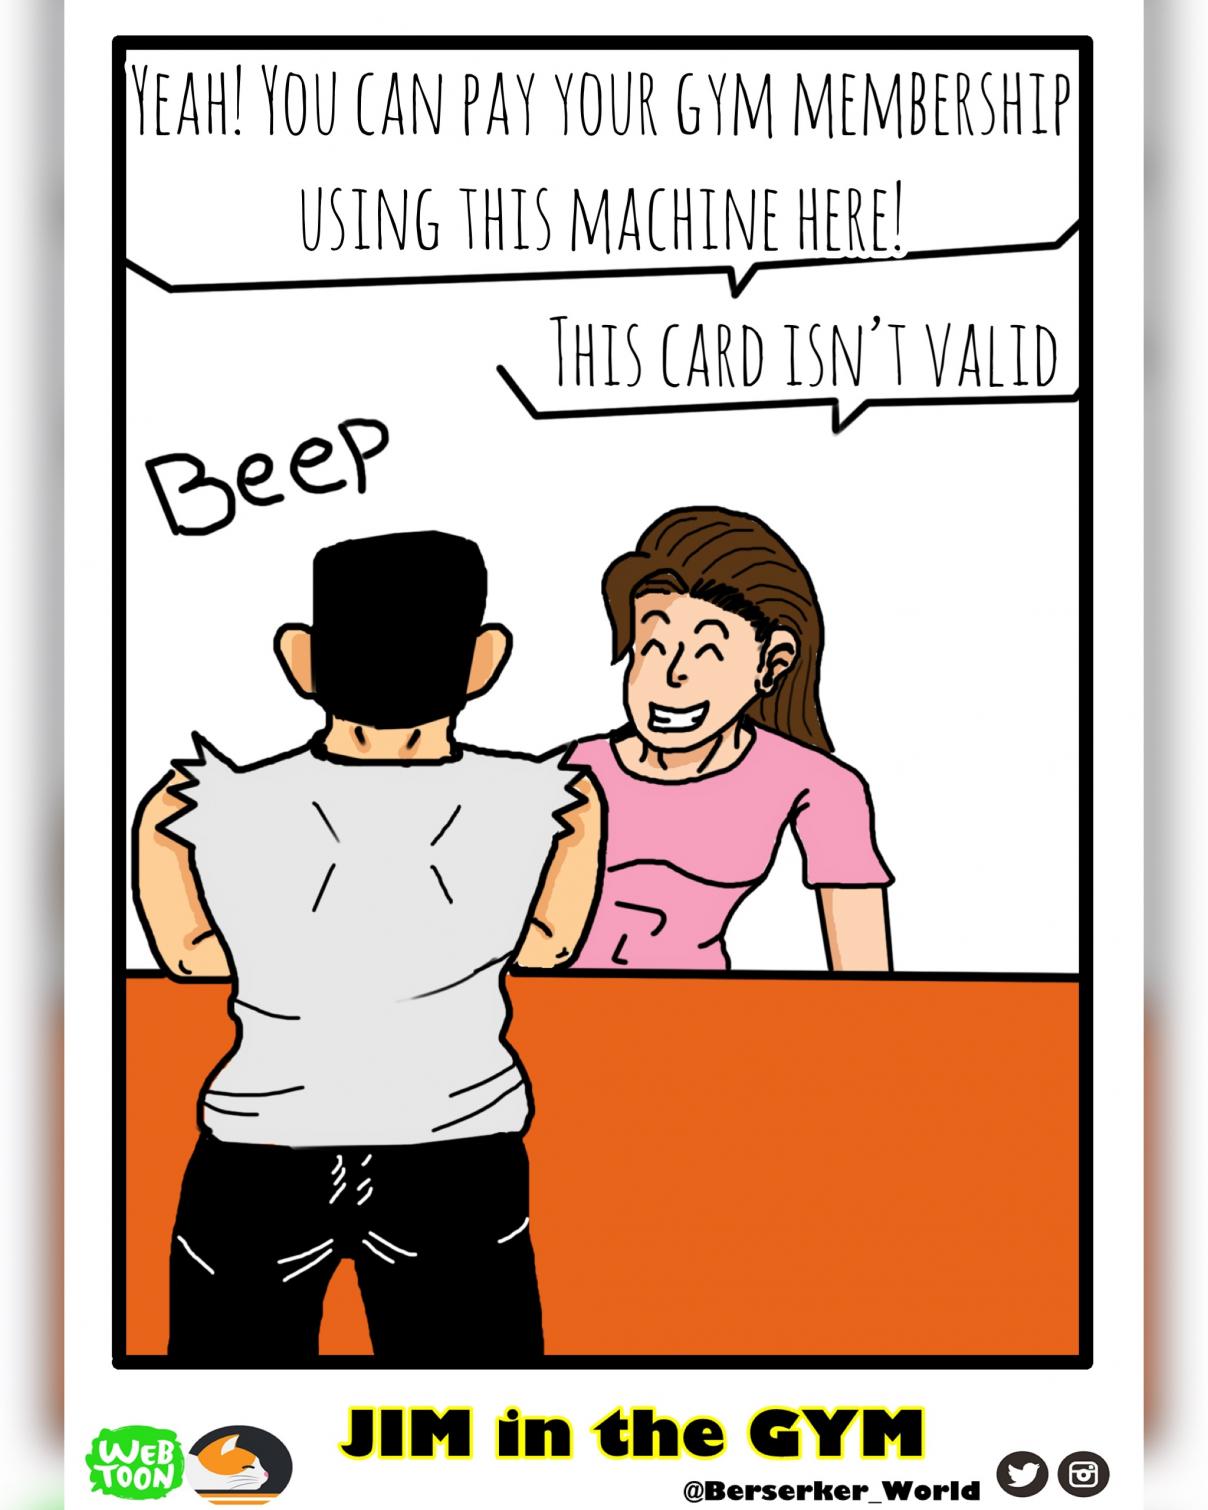 Jim in the Gym Vol. 1 Ch. 15 Card Invalid (Look us up Under